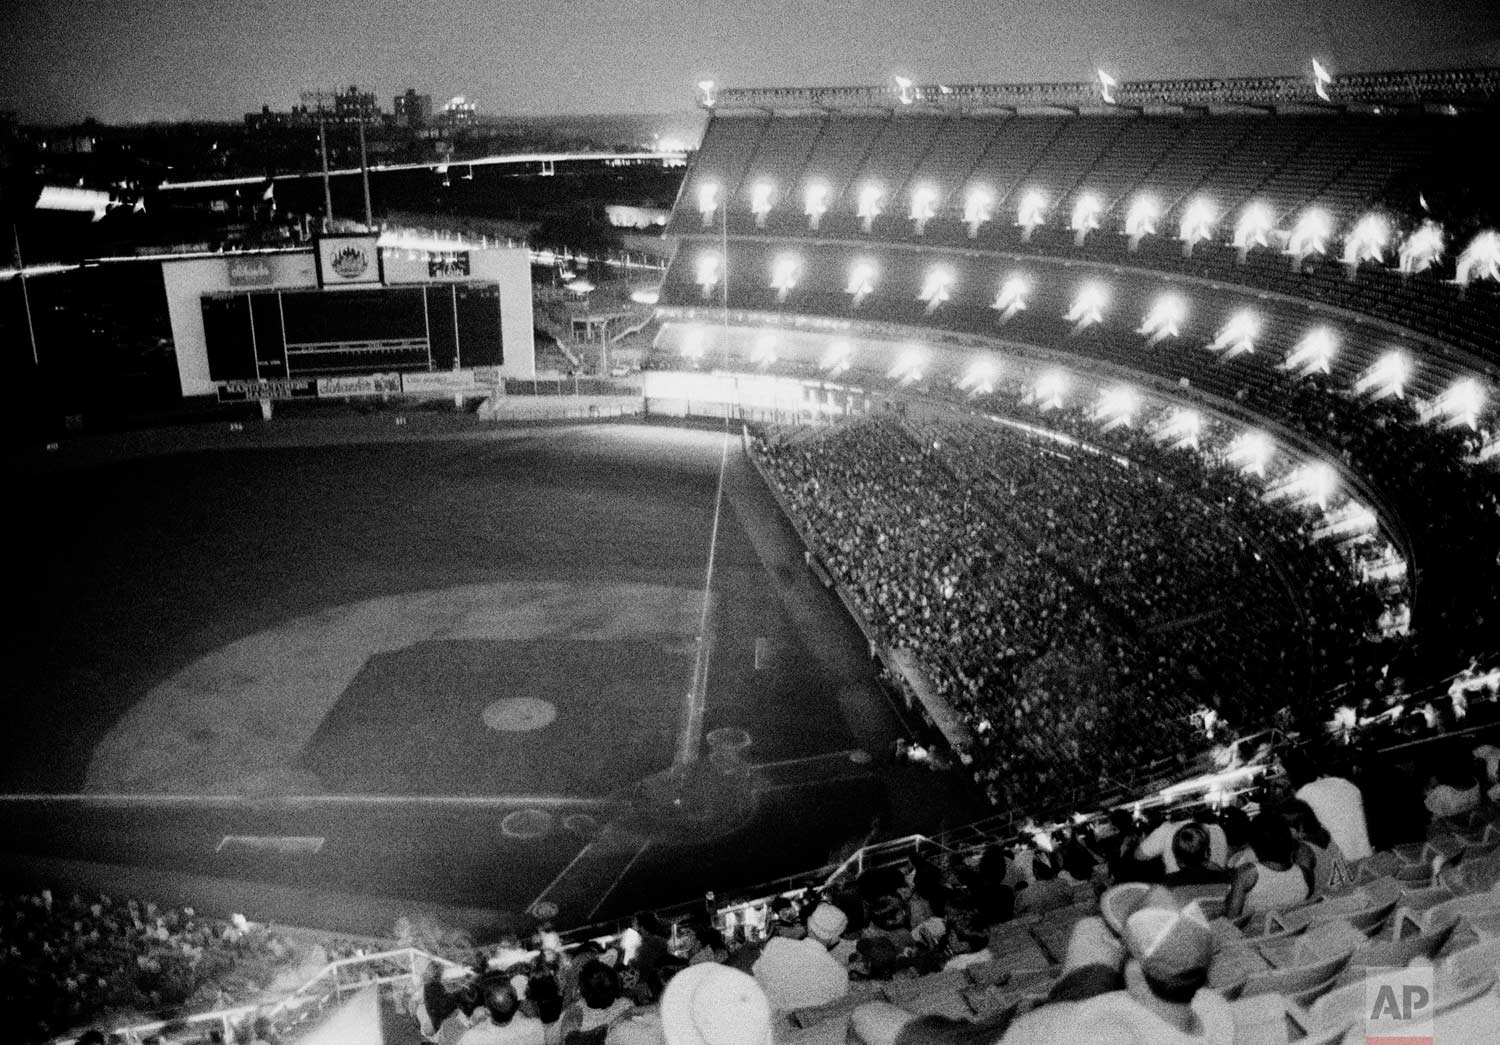  New York's Shea Stadium lies in darkness during the bottom of the sixth inning after the lights went out during the game with the Chicago Cubs, July 13, 1977.  The Mets were not the only ones blacked out as it appeared the power failure affected mos